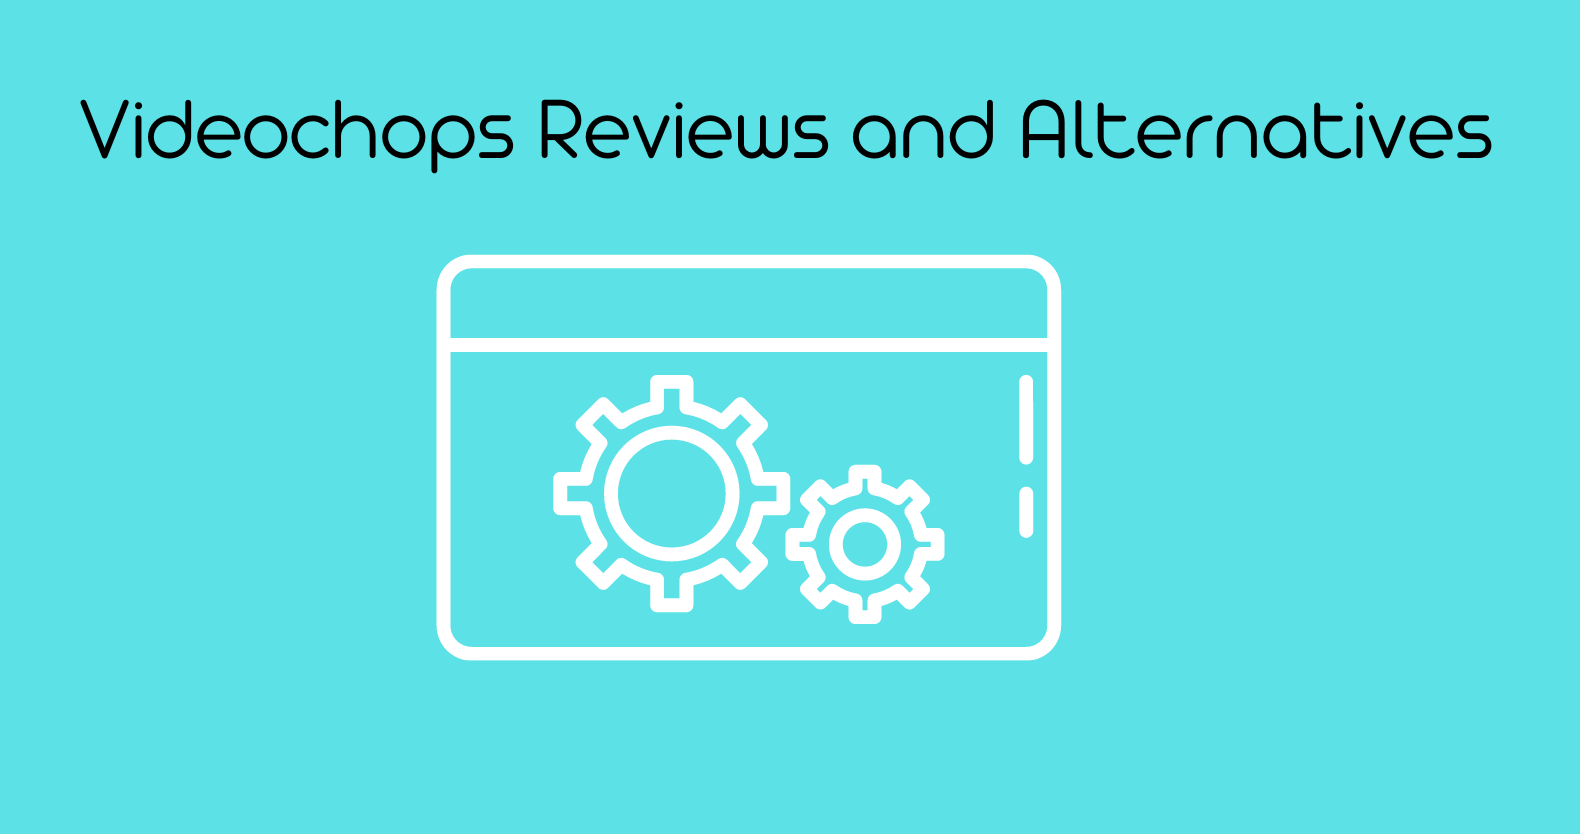 Videochops Reviews and Alternatives